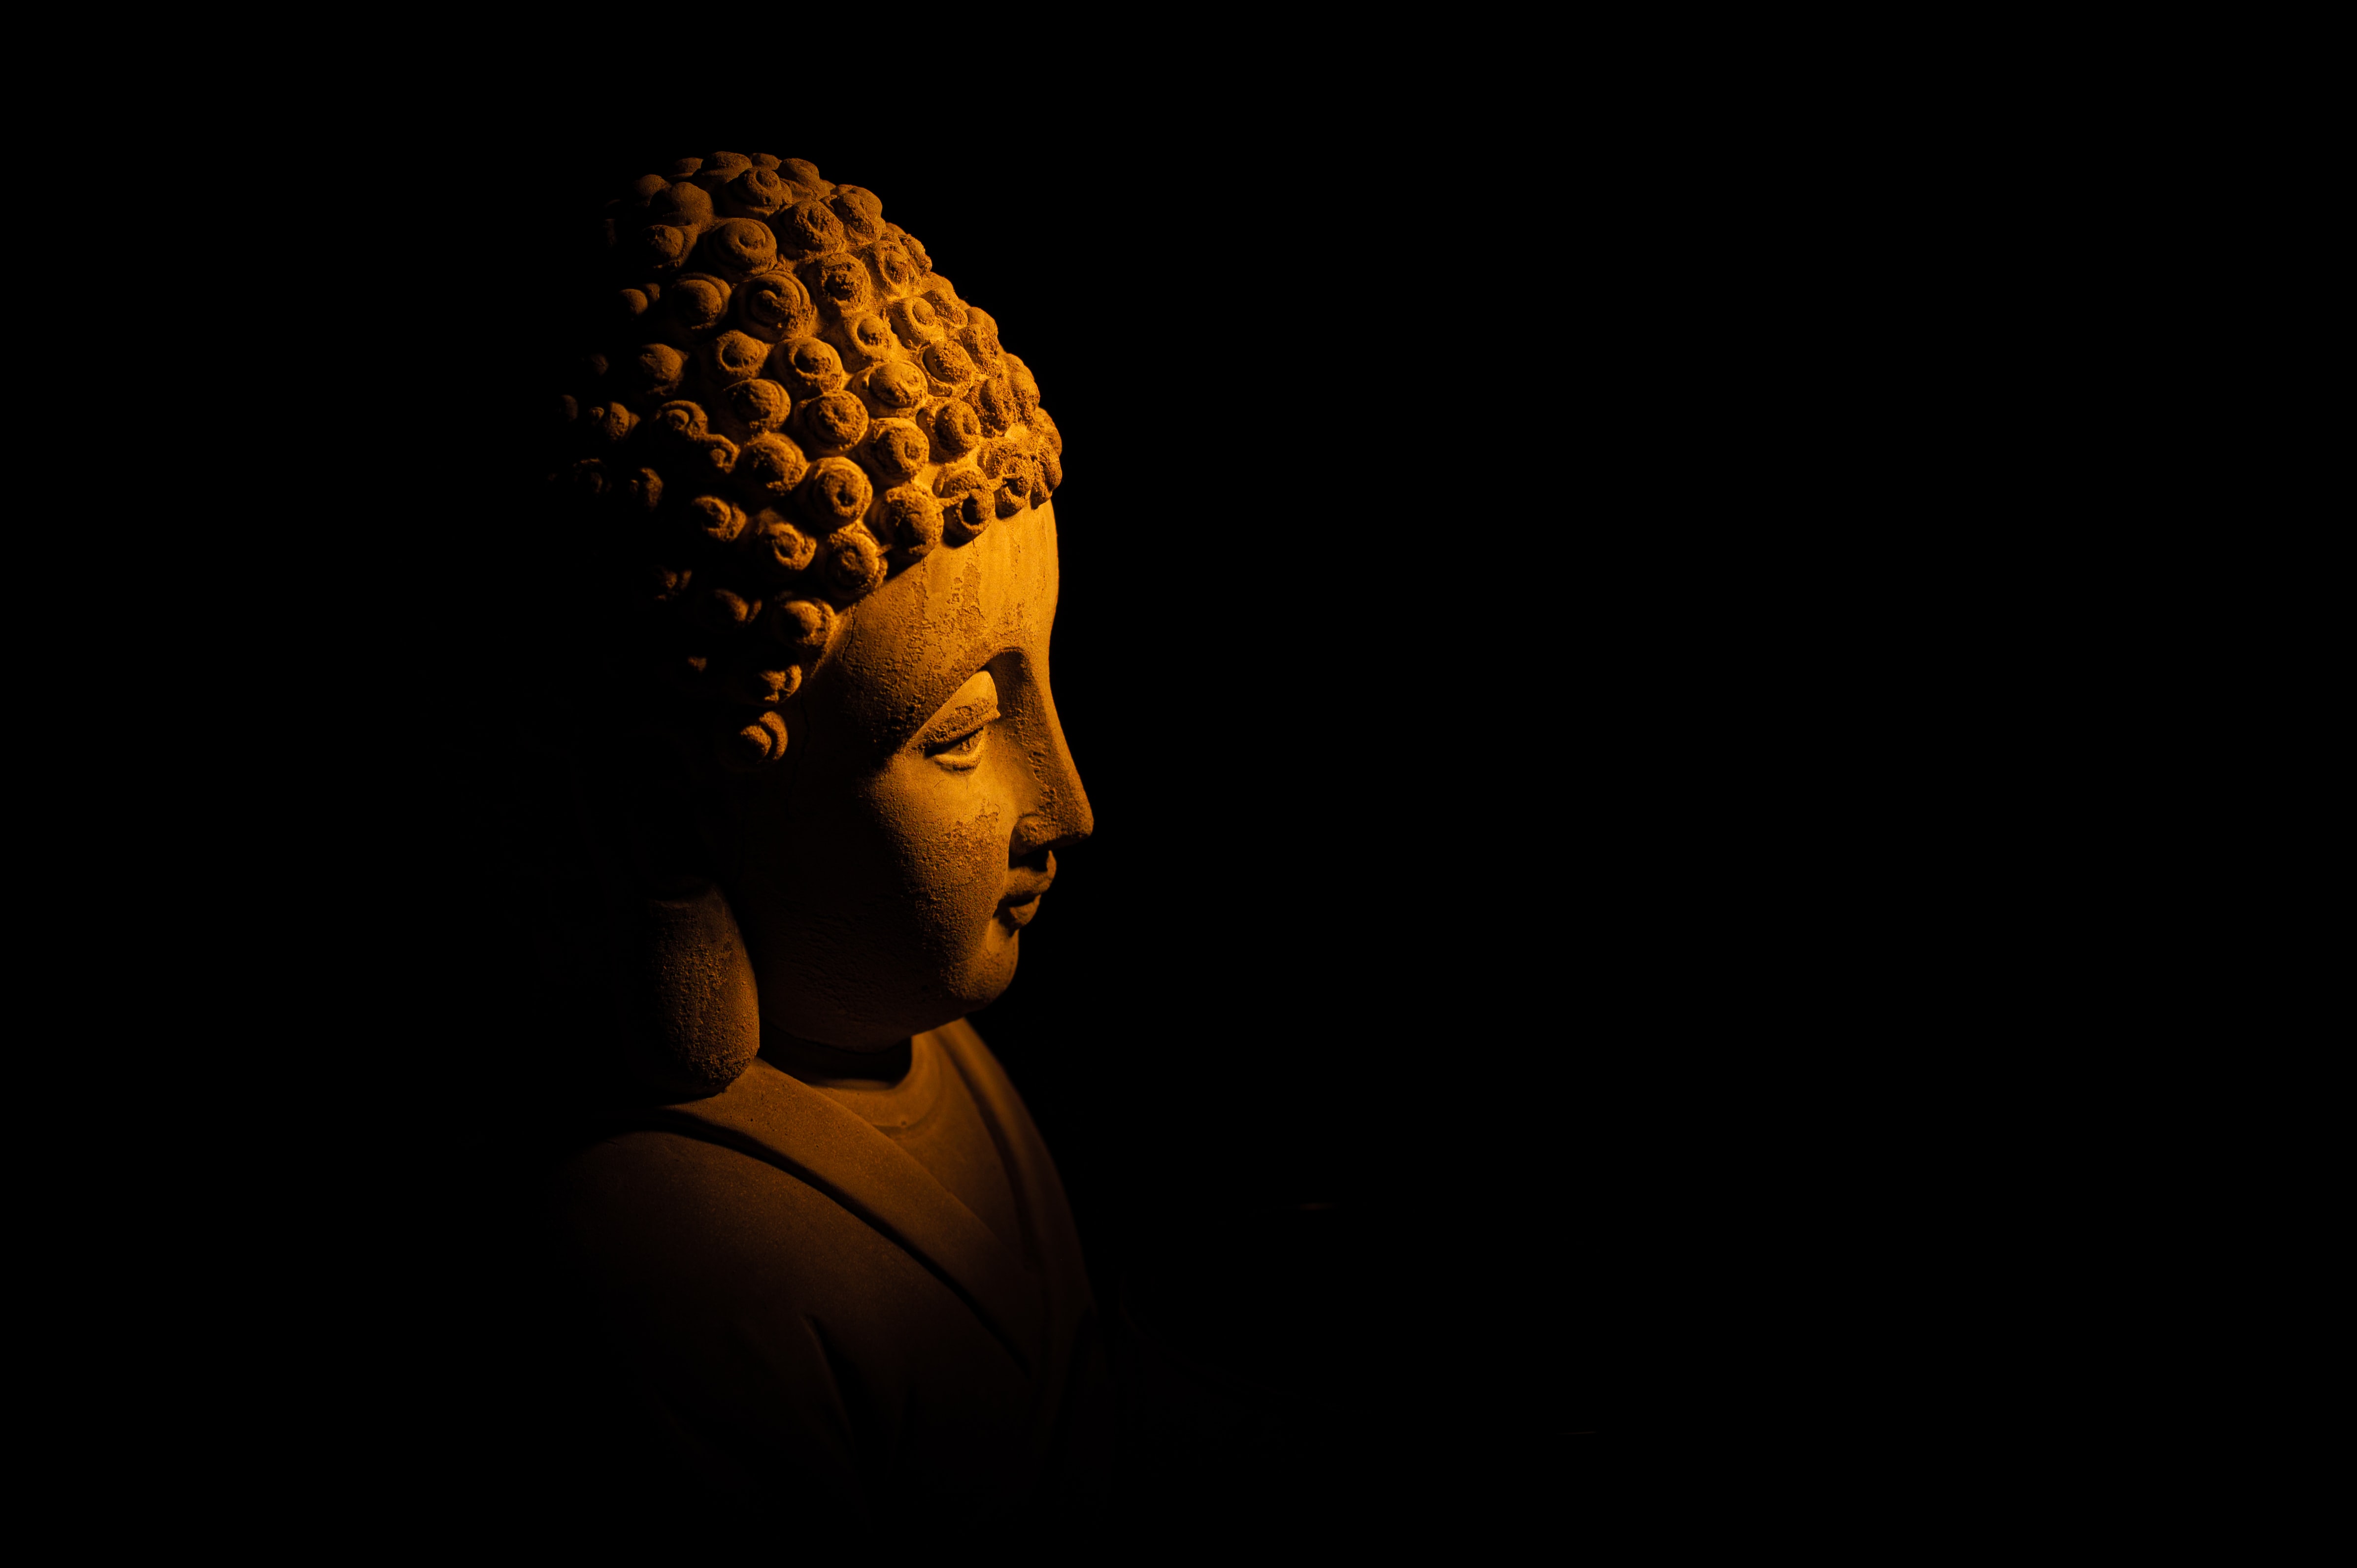 collection of best Buddha HD wallpaper